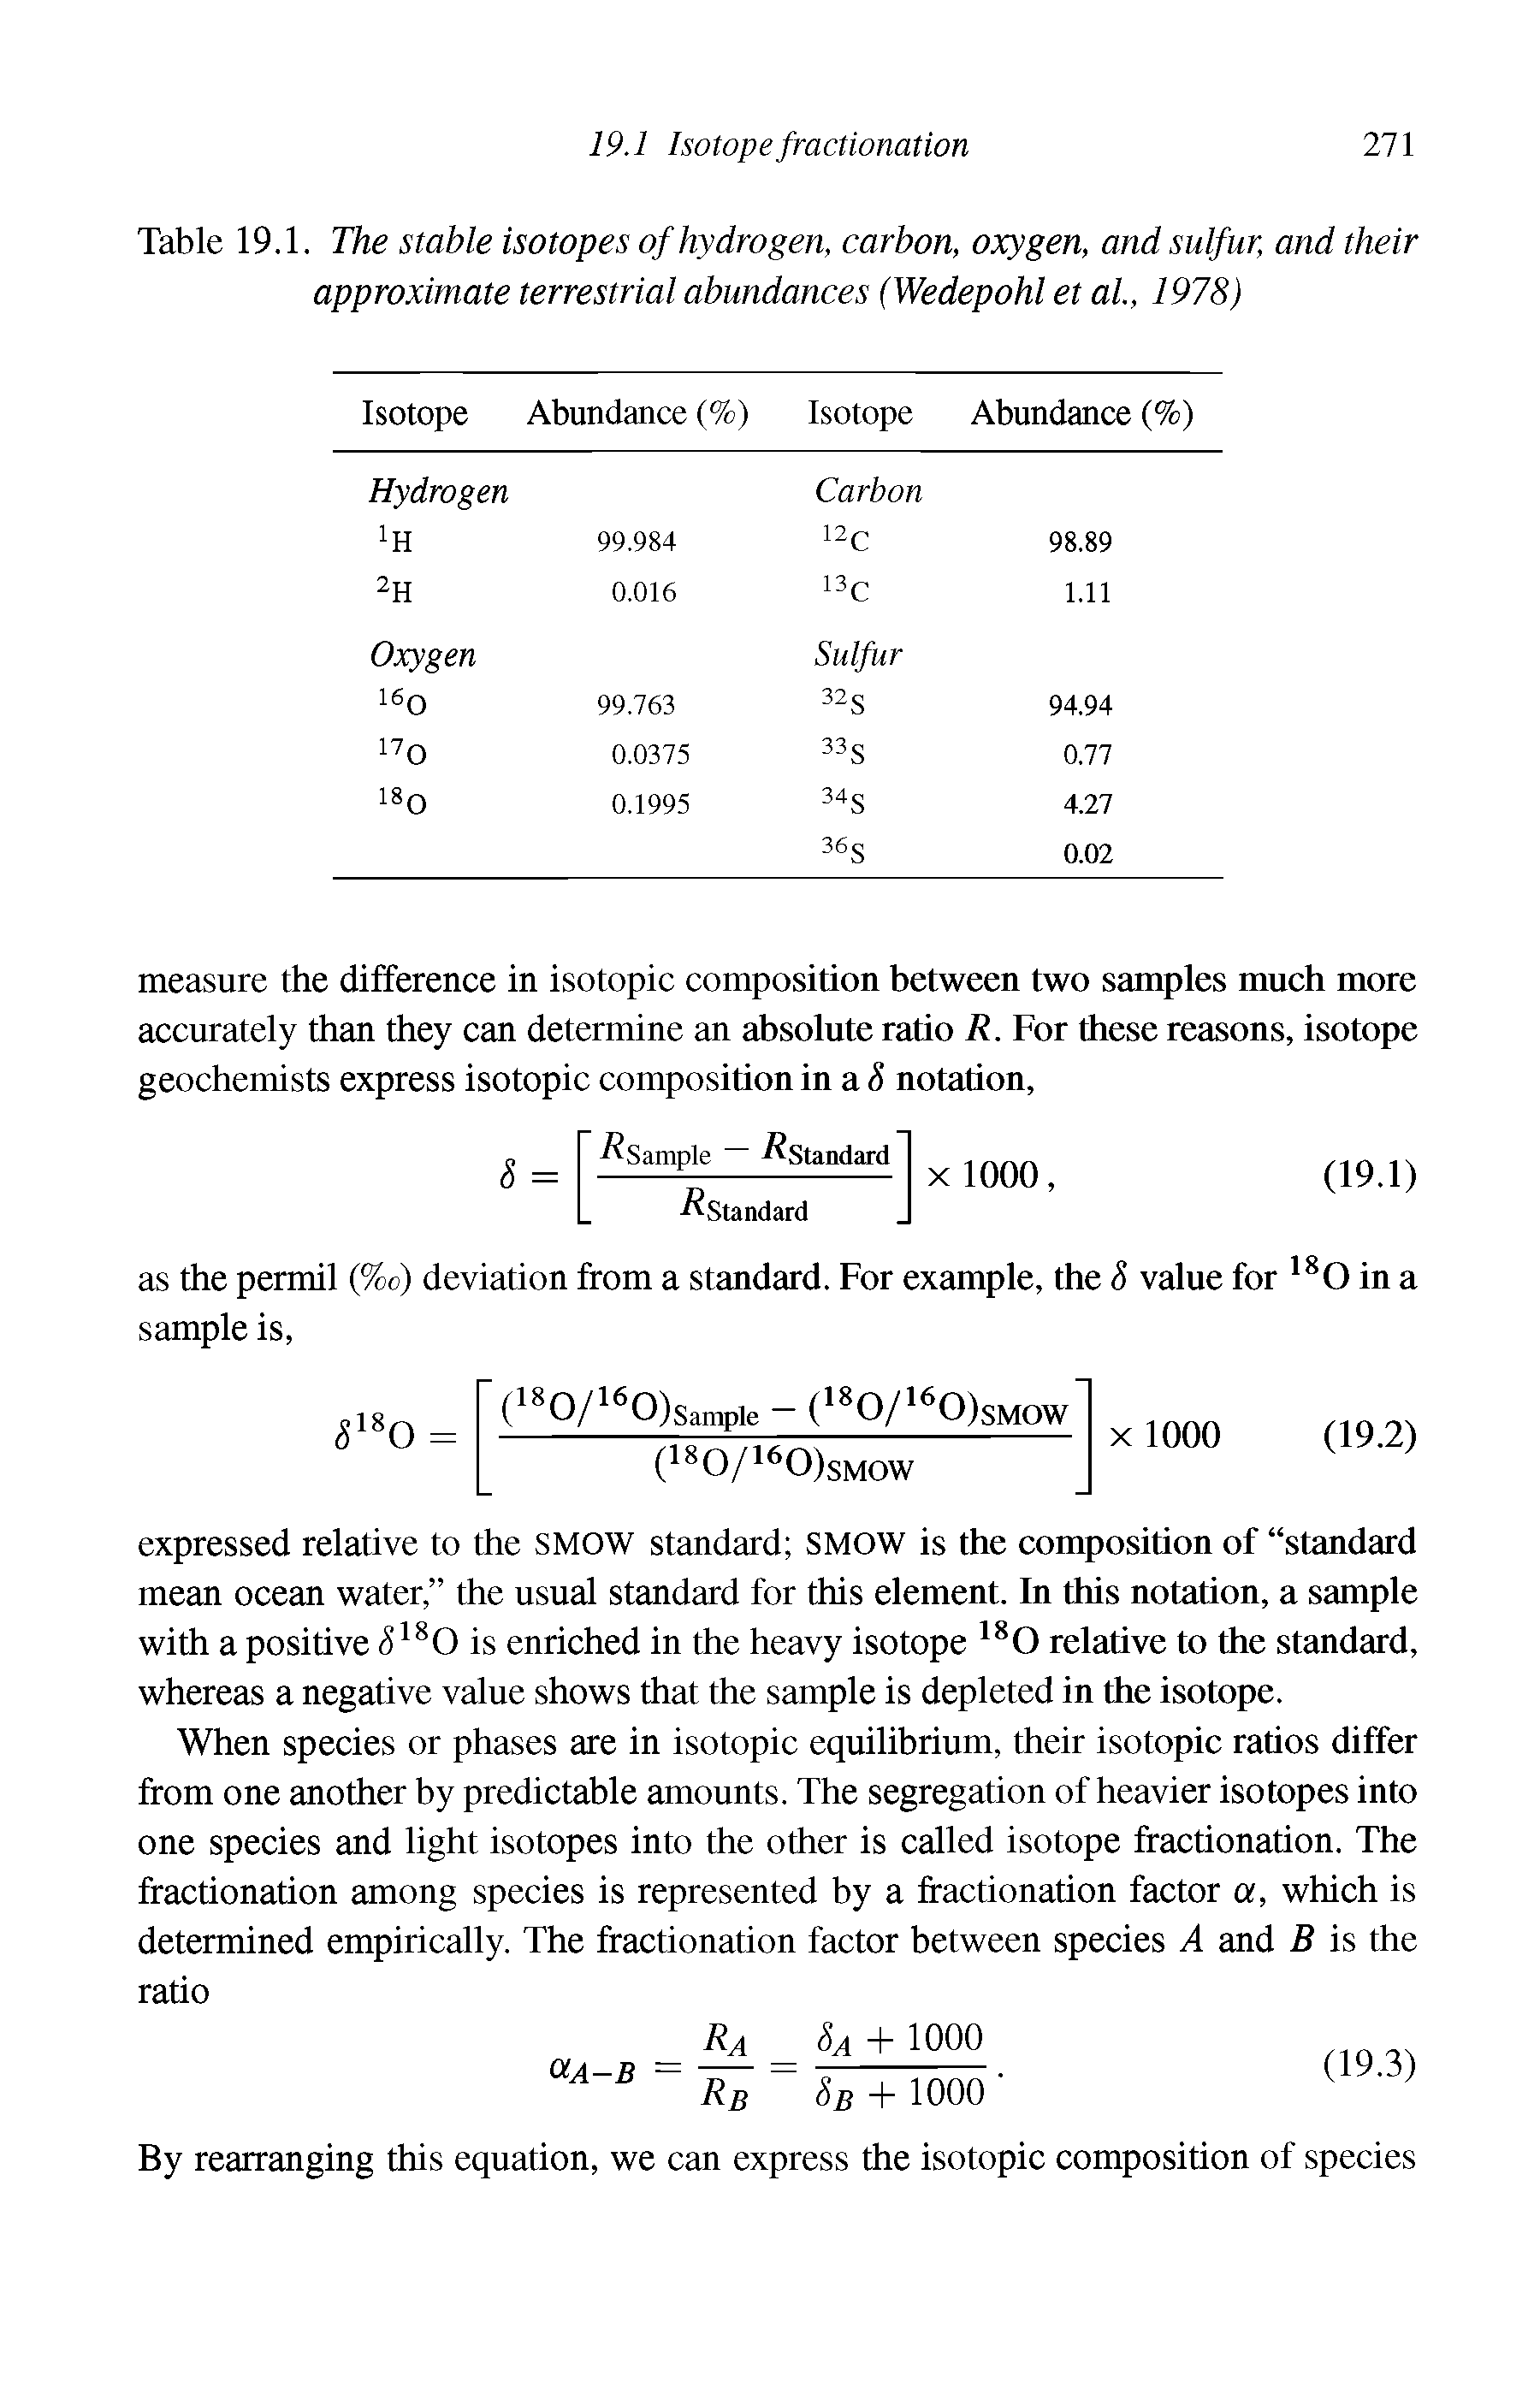 Table 19.1. The stable isotopes of hydrogen, carbon, oxygen, and sulfur, and their approximate terrestrial abundances (Wedepohl et al., 1978)...